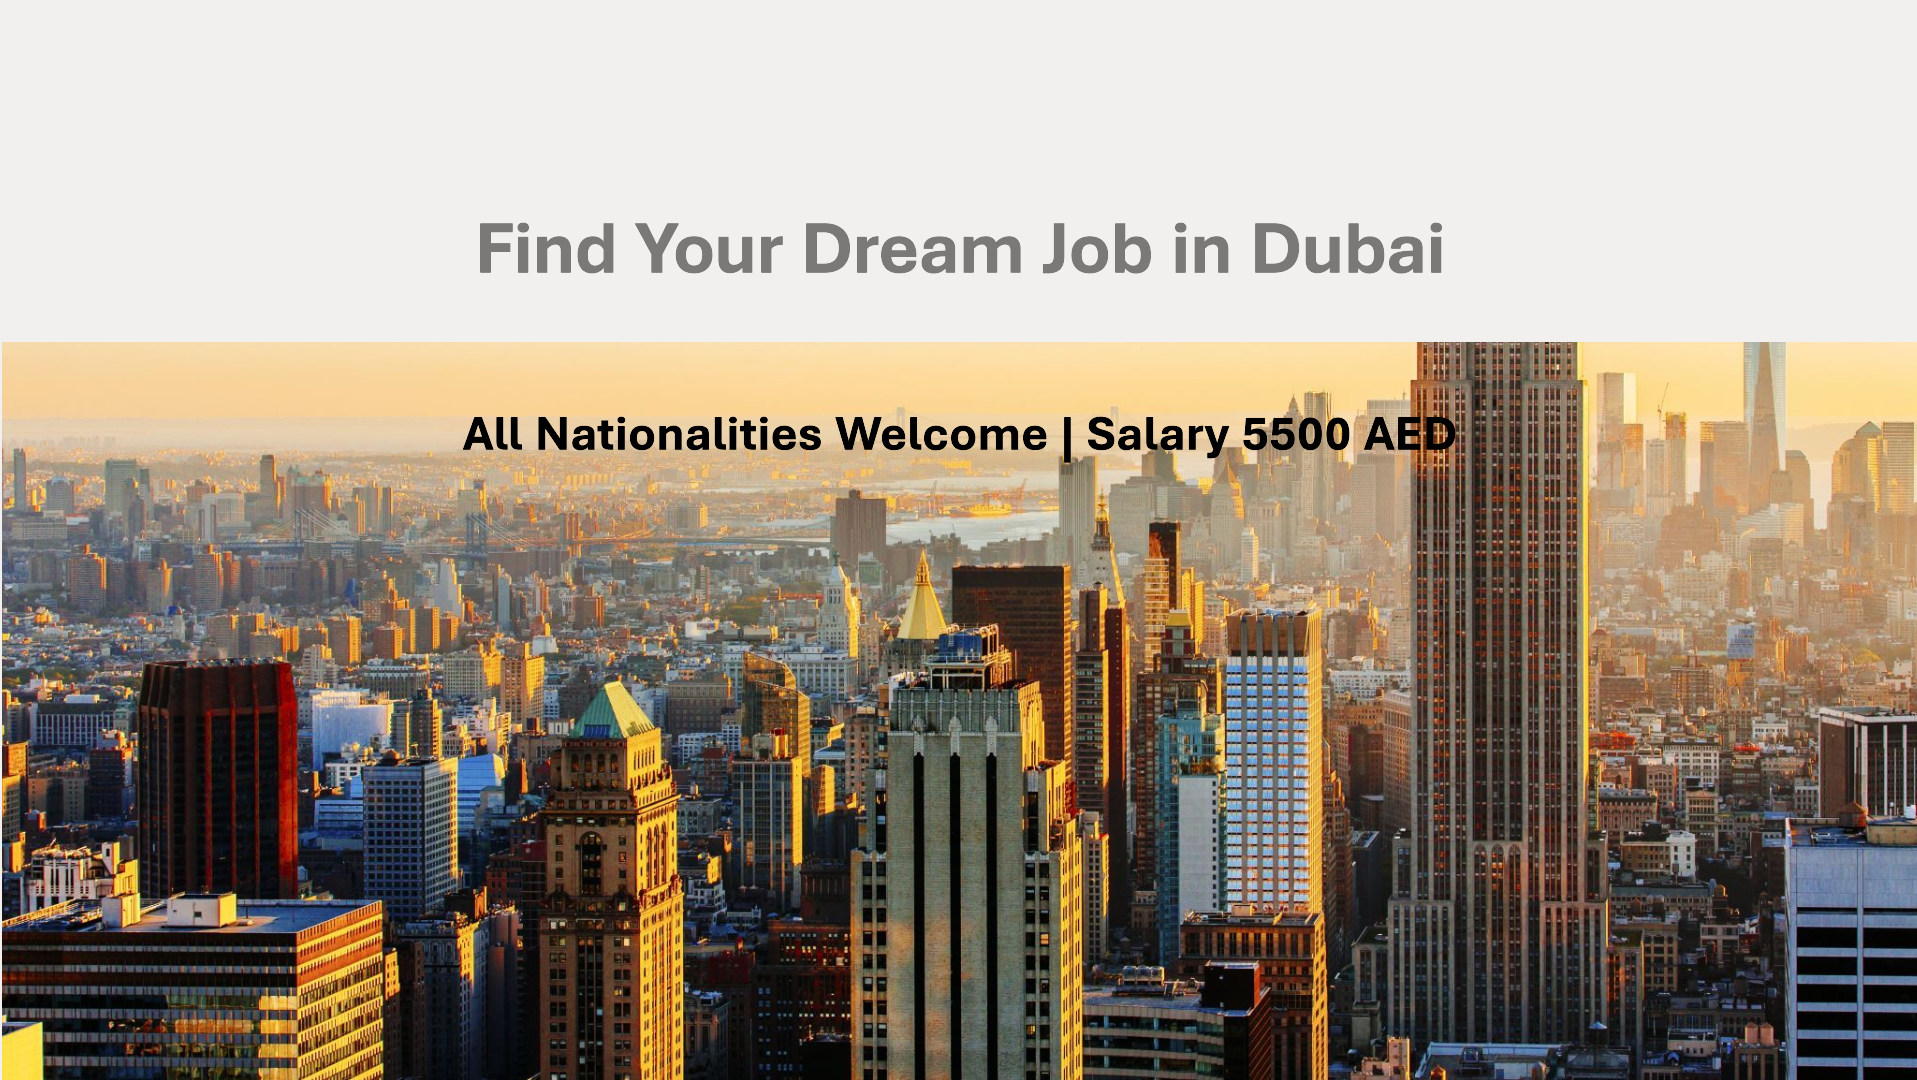 careers in dubai for all nationalities with salary 5500 AED